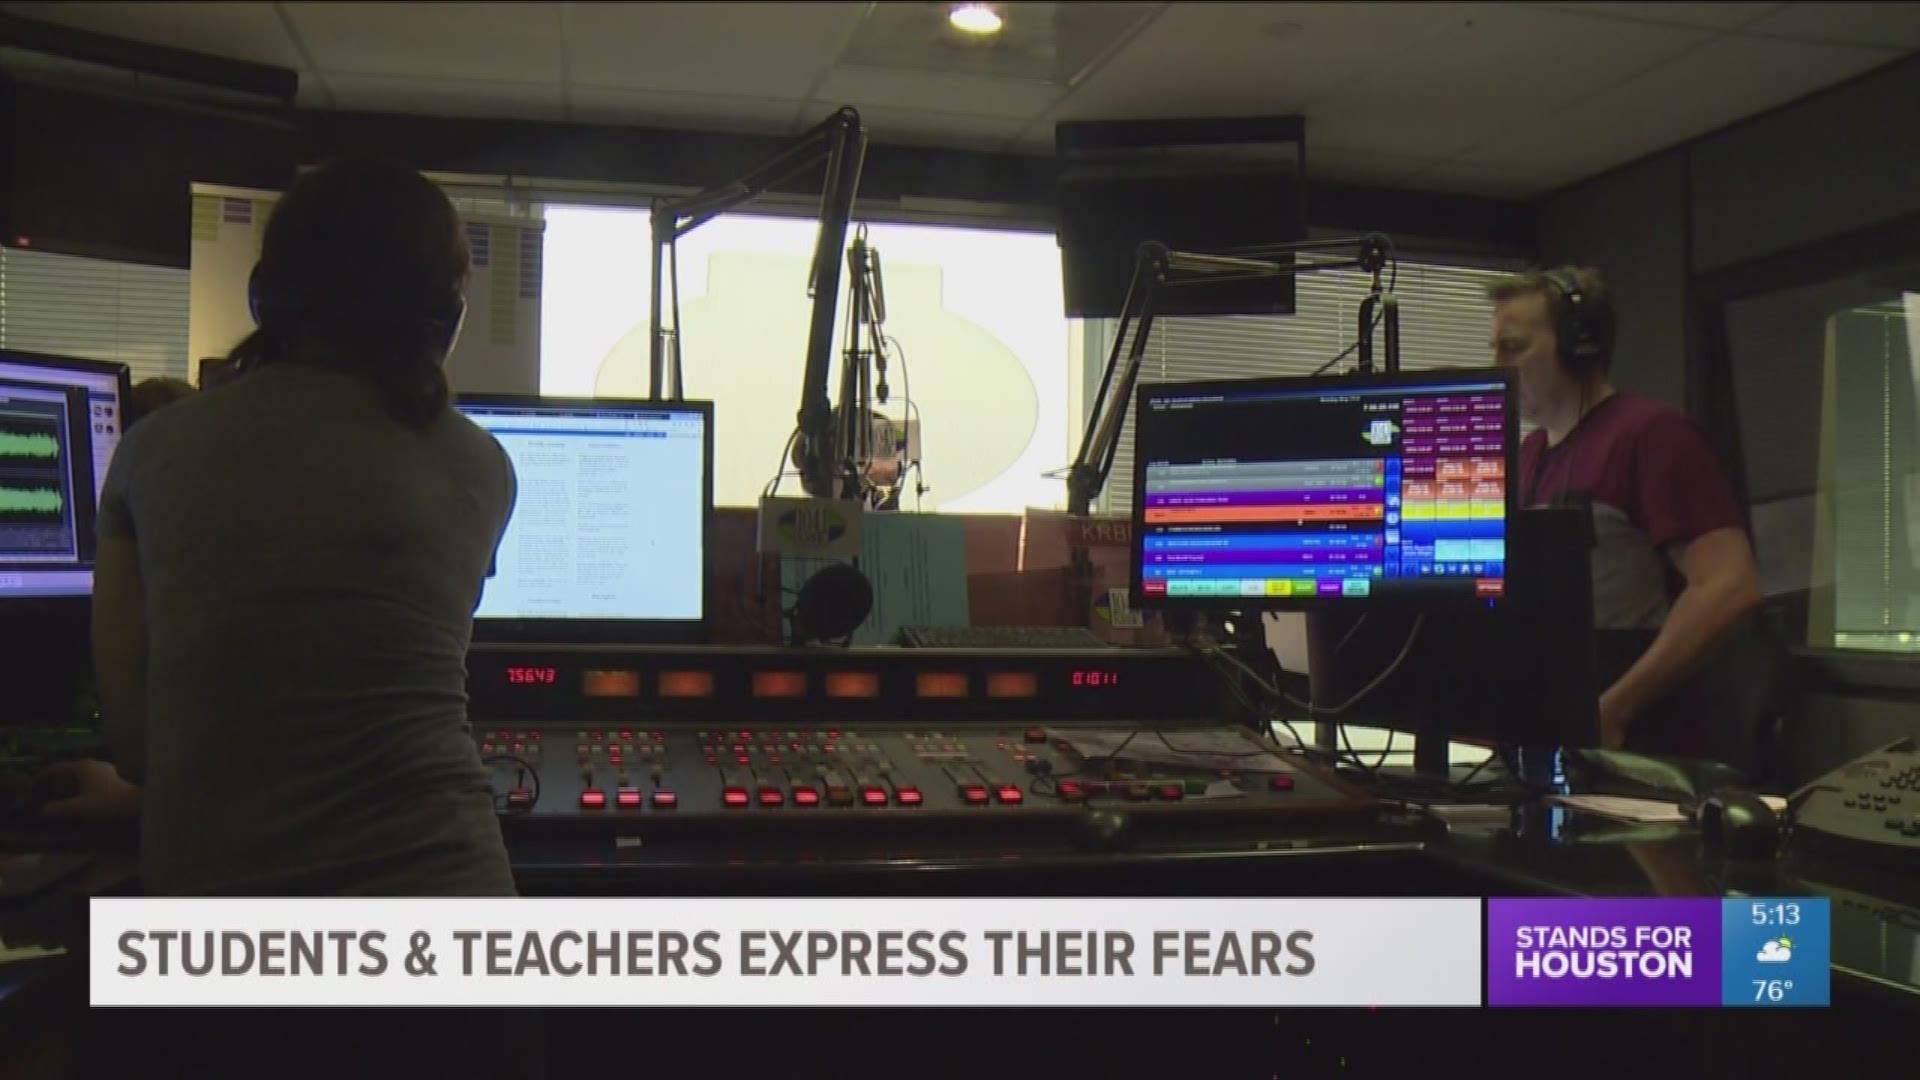 KRBE held a call in show Monday for local students and teachers to voice their thoughts, fears, and concerns after the Santa Fe High School shooting. 